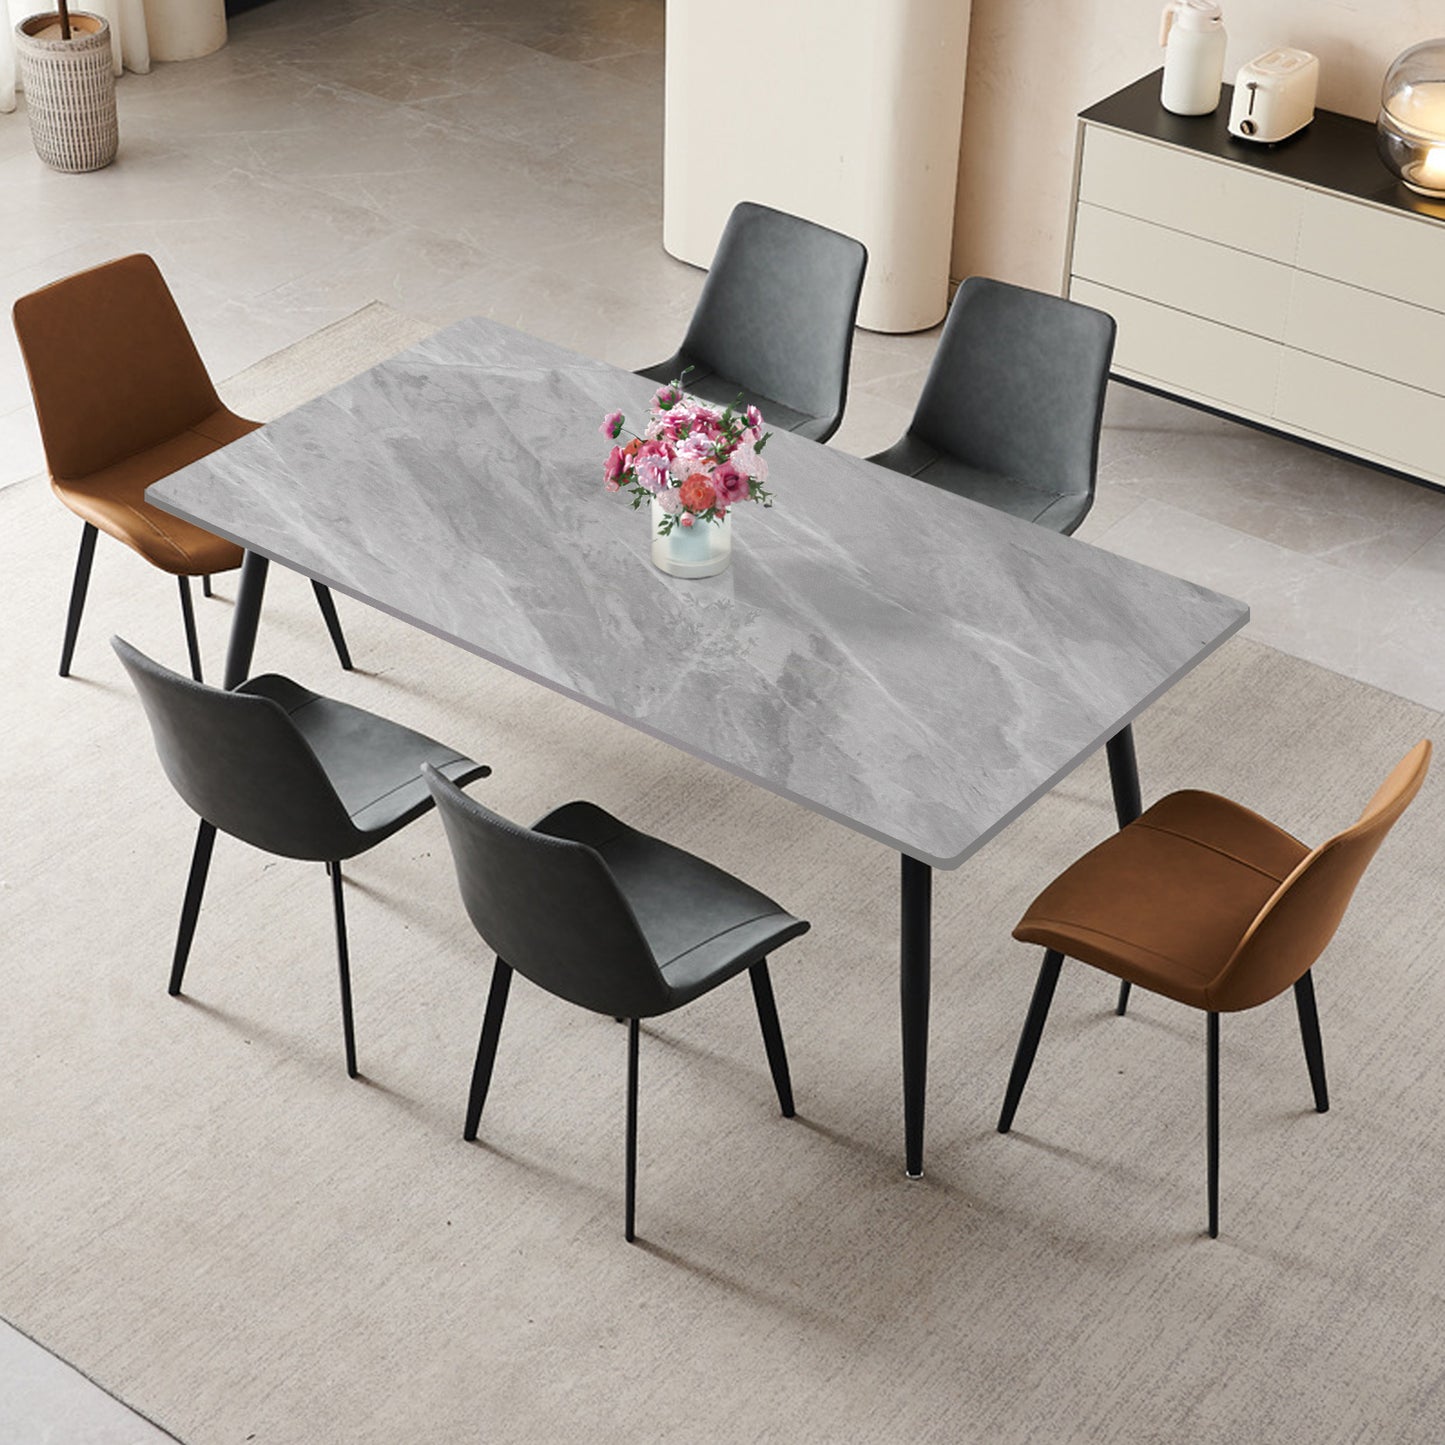 Dining Table Sintered Stone Table Marble Table Porcelain Dining Table for Kitchen, Living Room, 63 inch White Table Only